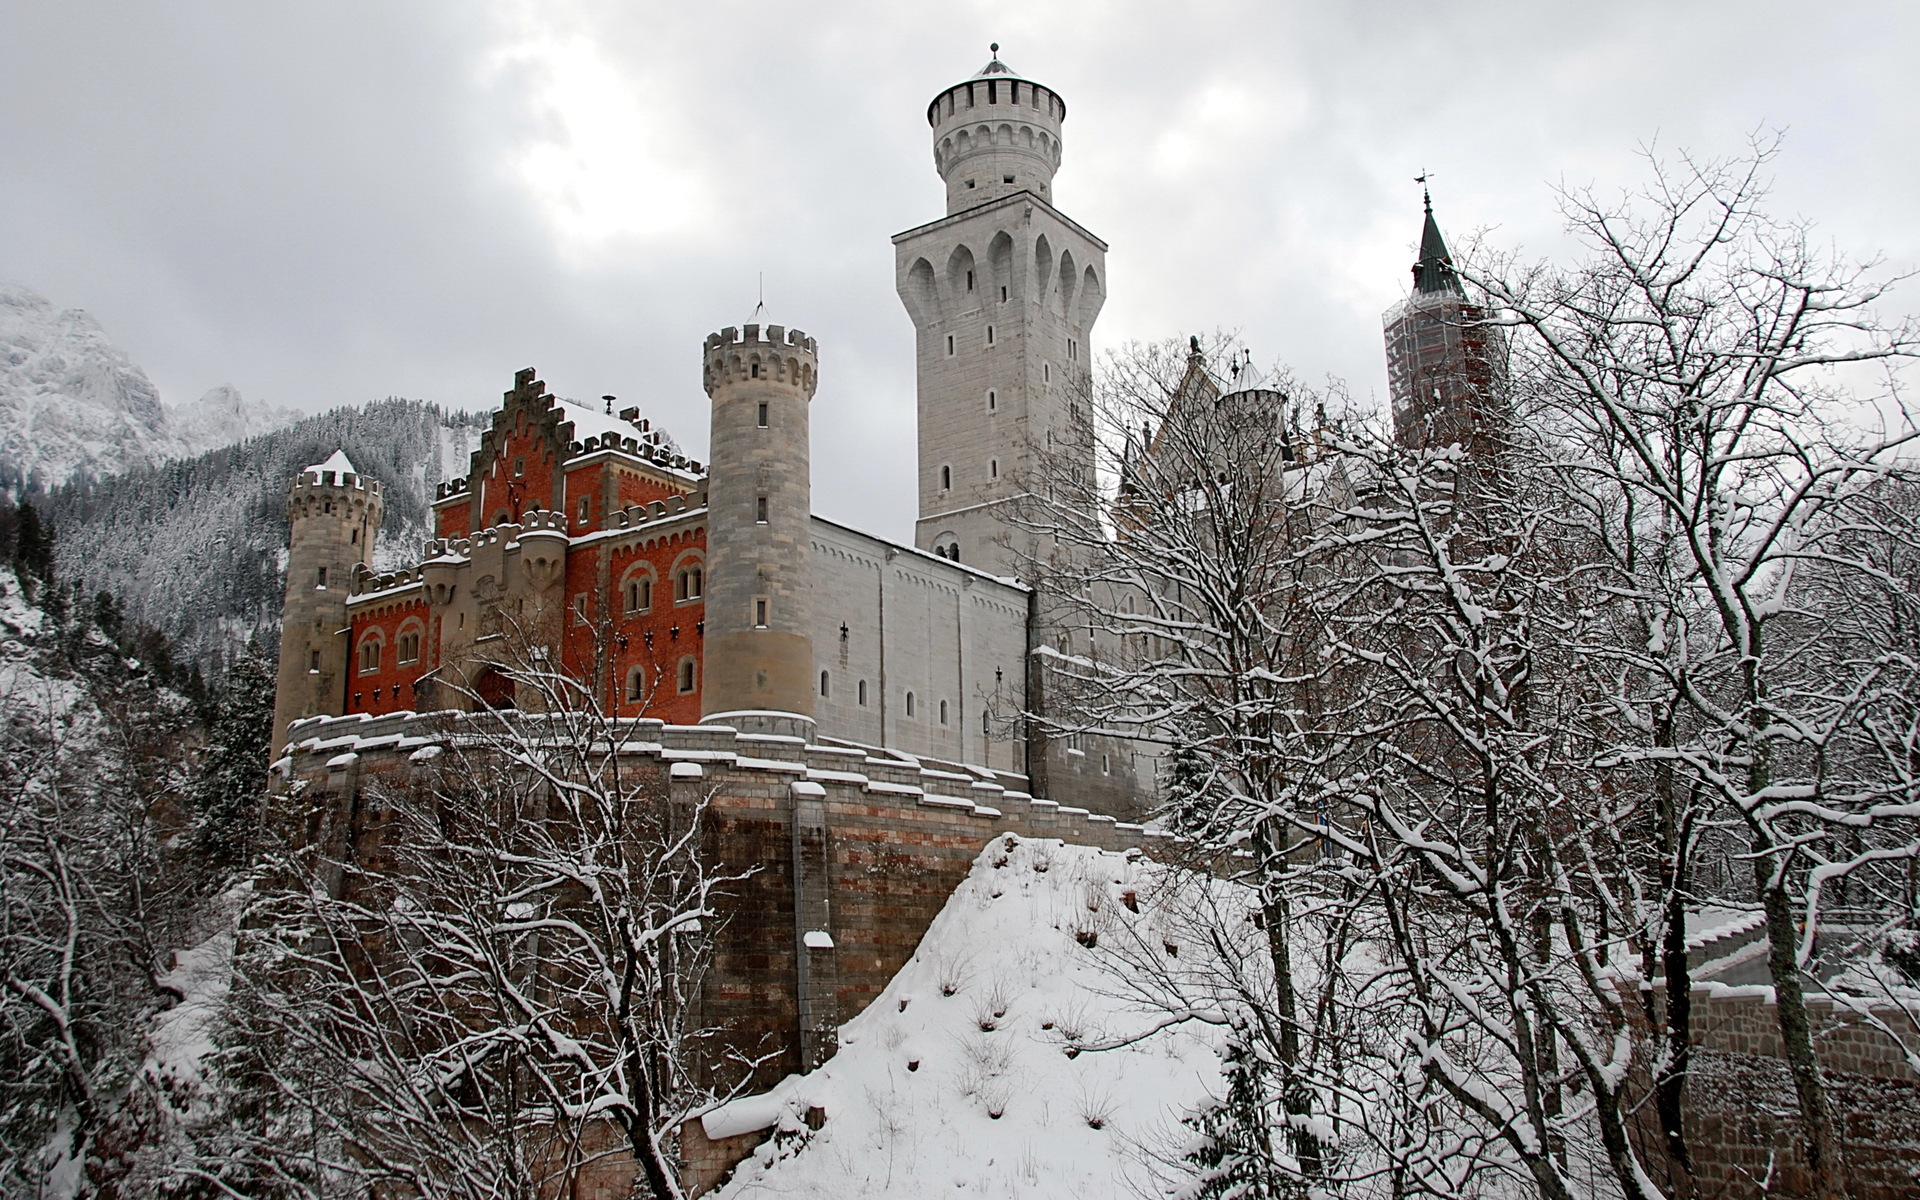 man made, castle, forest, germany, lock, mountain, snow, tree, winter, castles cellphone